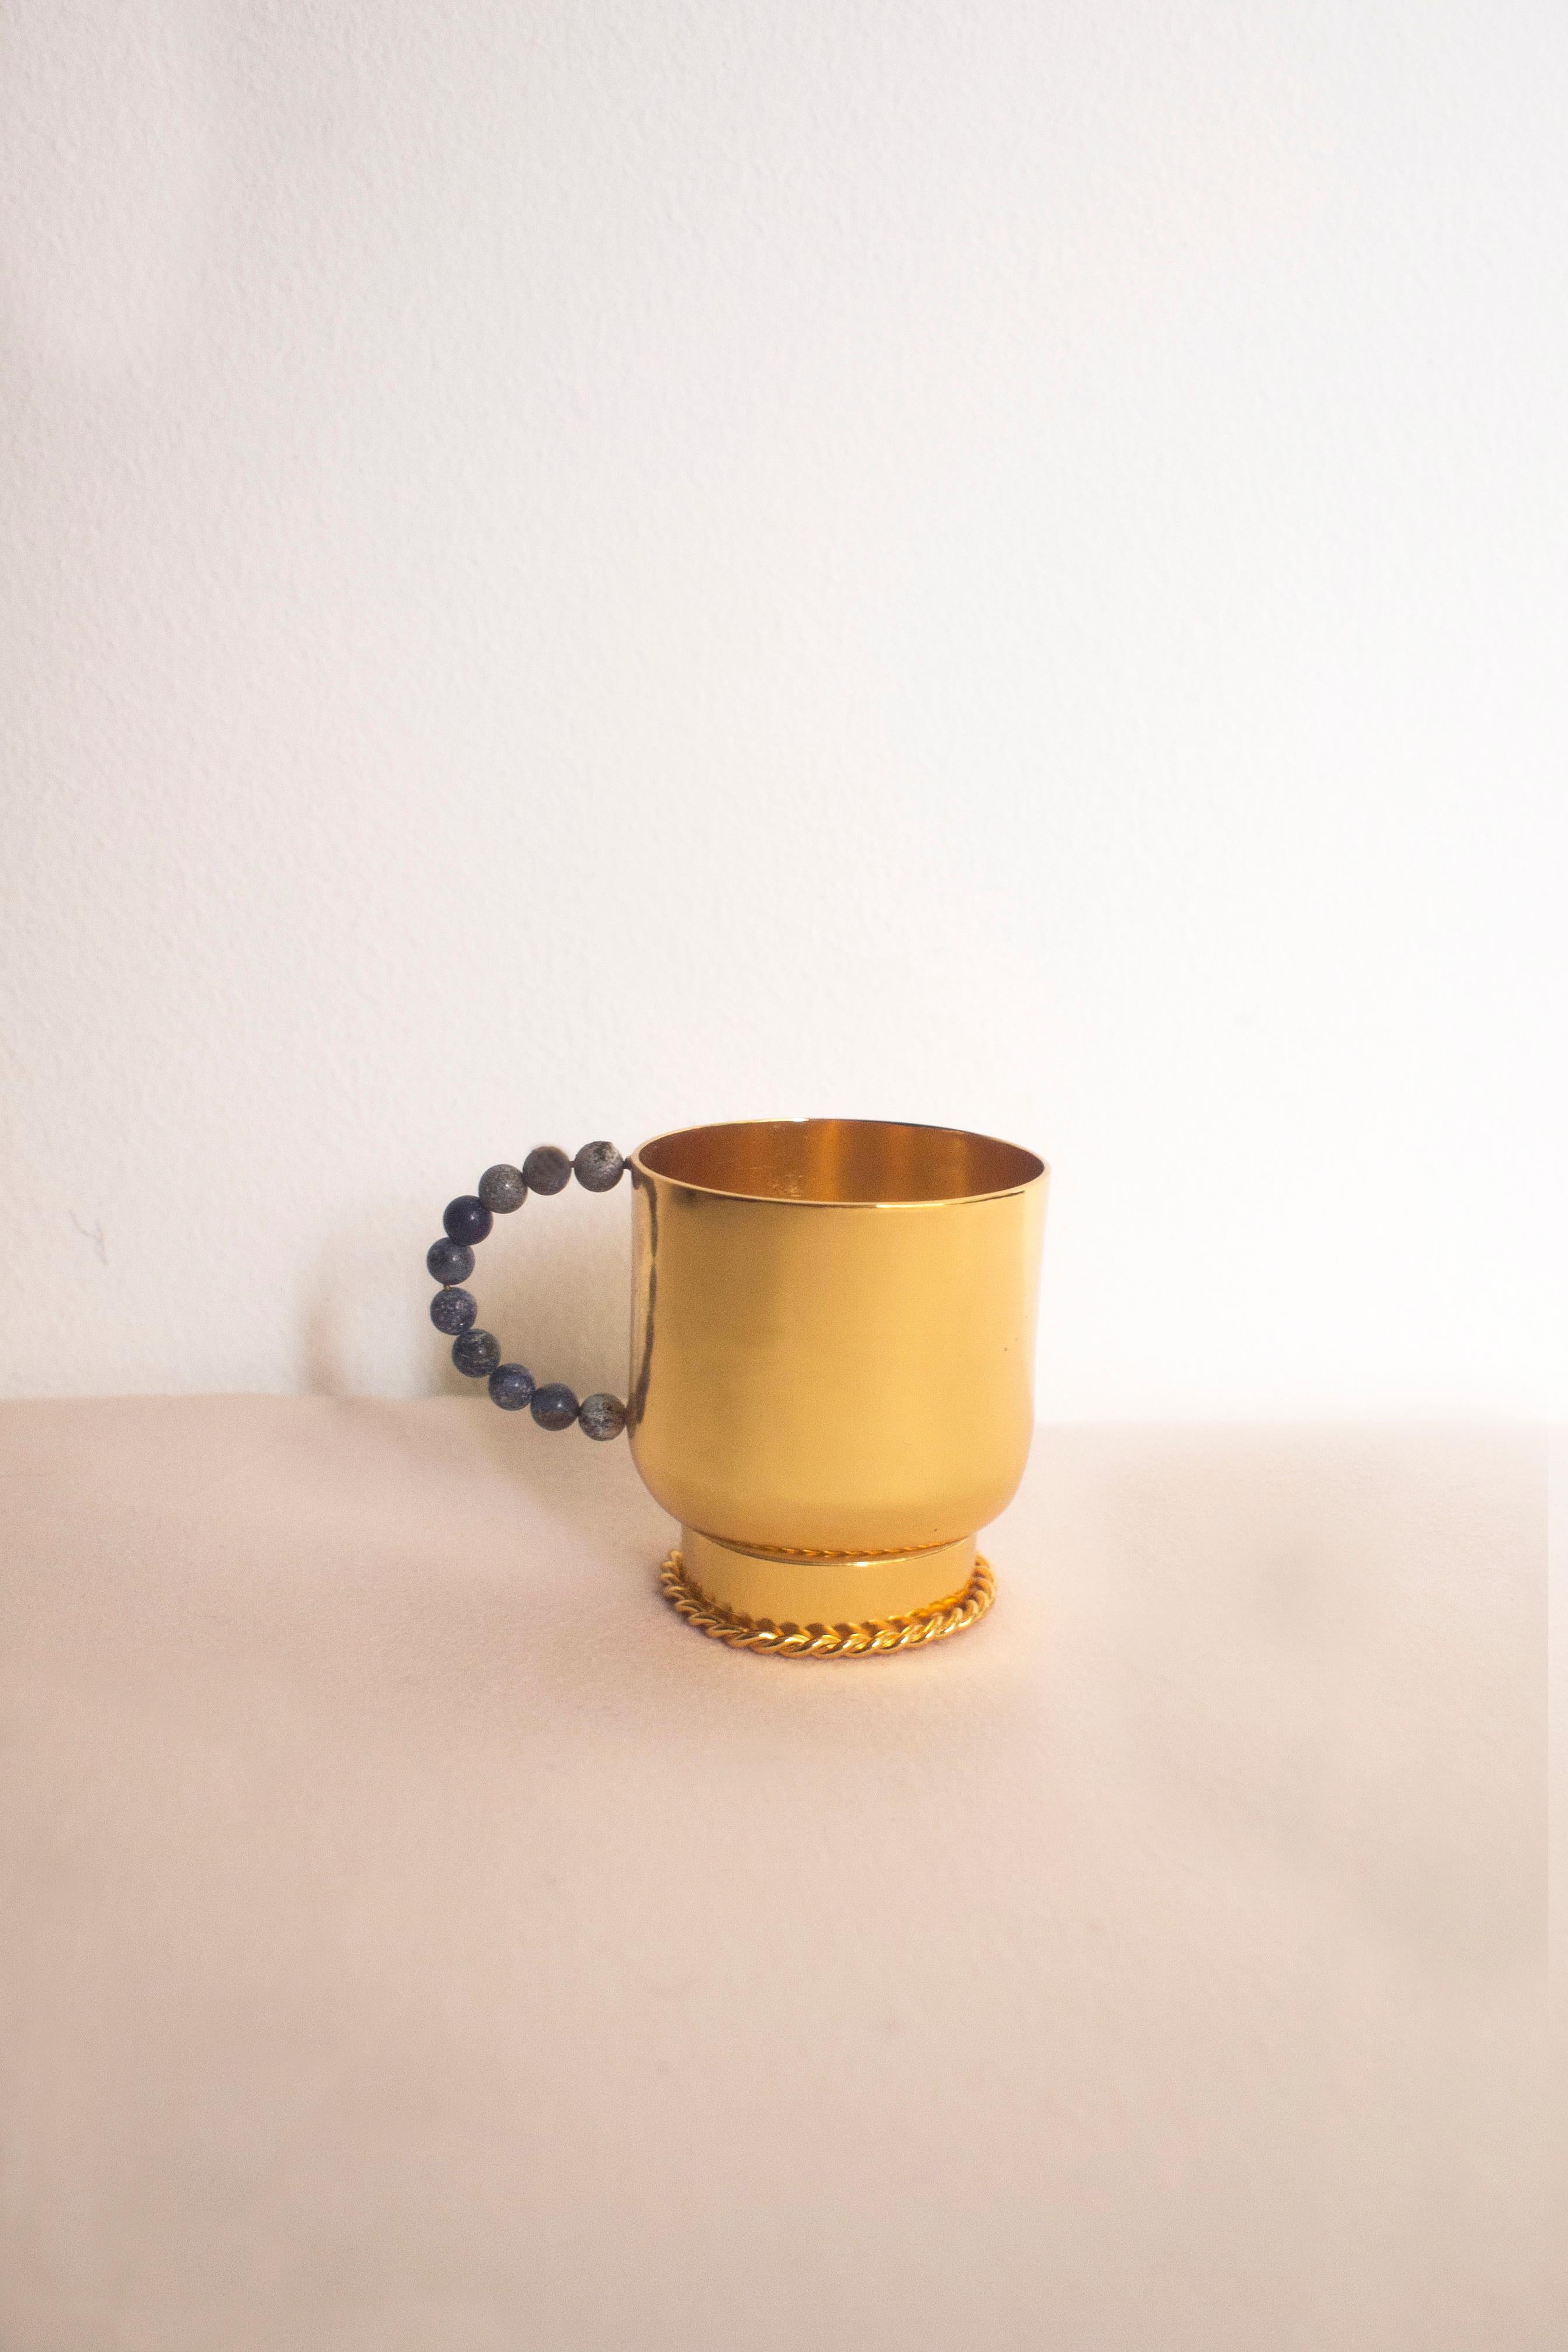 Elevate your daily tea or coffee ritual with our exquisite perline torch cup. The plated brass cup is handcrafted in Italy using sheet turning techniques. The handle, adorned with a row of lapiz lazuli stones, introduces a touch of jewelry-inspired